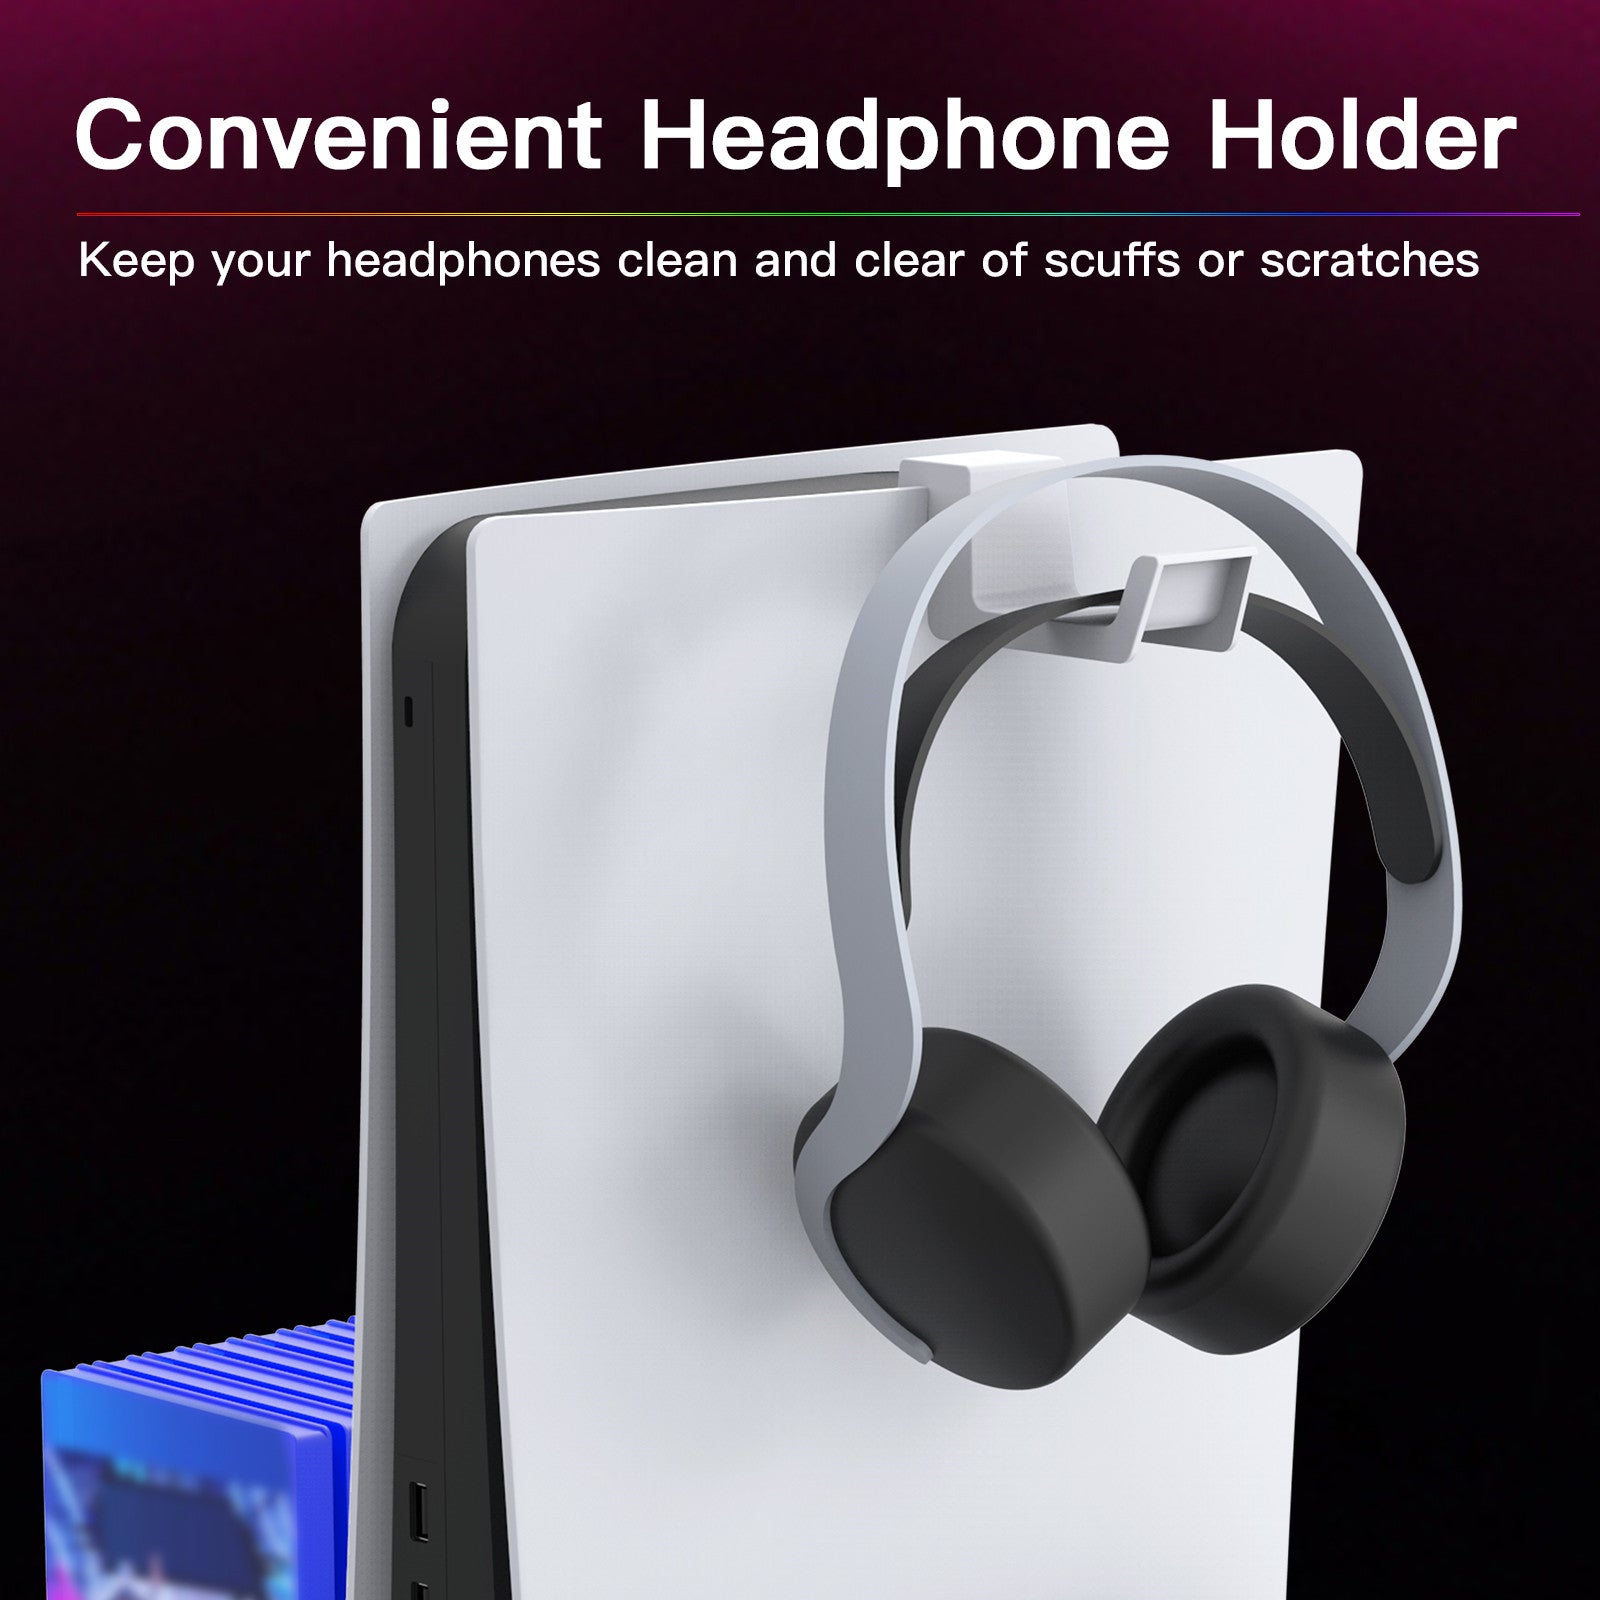 Use the included headphone hook to hang your headphones on it.